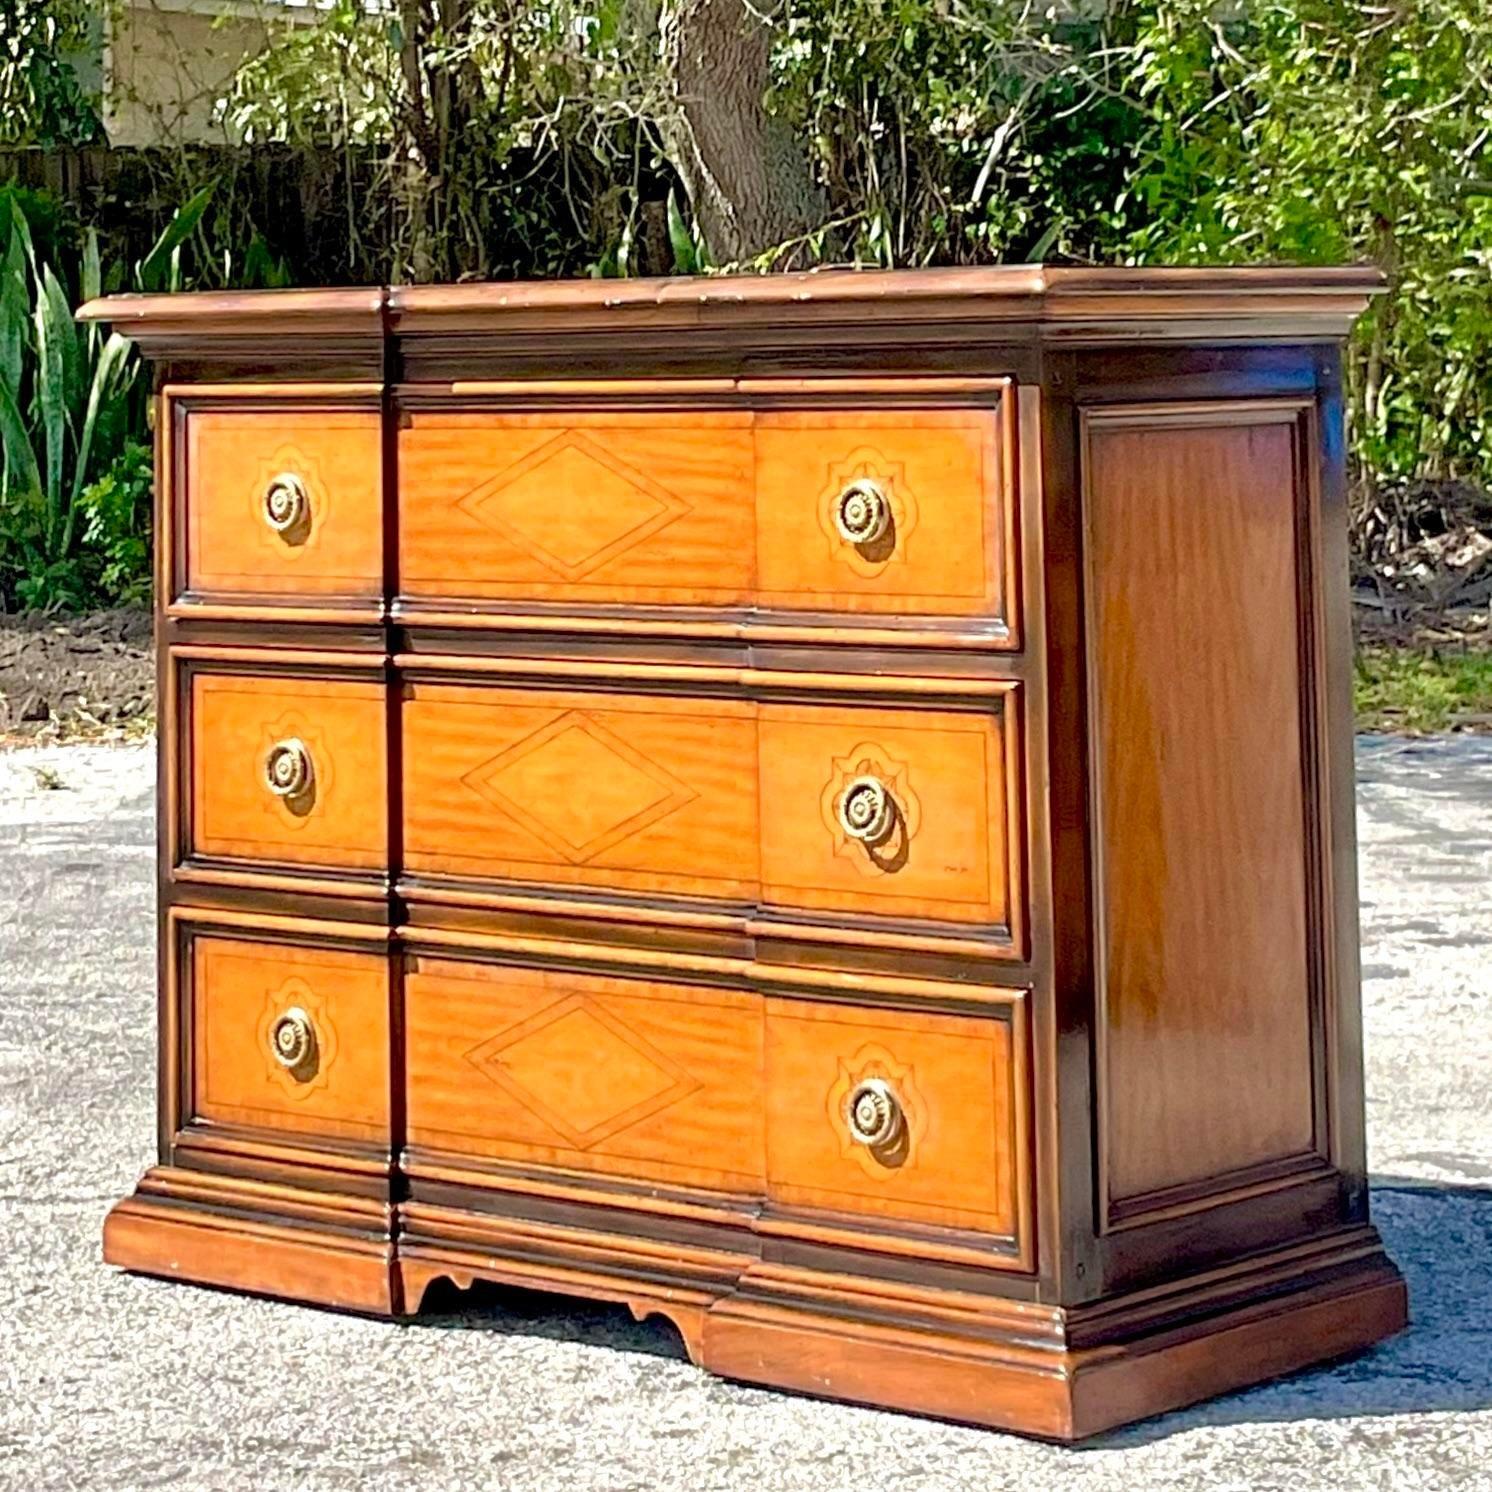 A fabulous vintage Boho chest of drawers. Made by the iconic Theodore Alexander group and tagged inside the drawer. A gorgeous marquetry top and roll front design. Acquired from a Palm Beach estate.